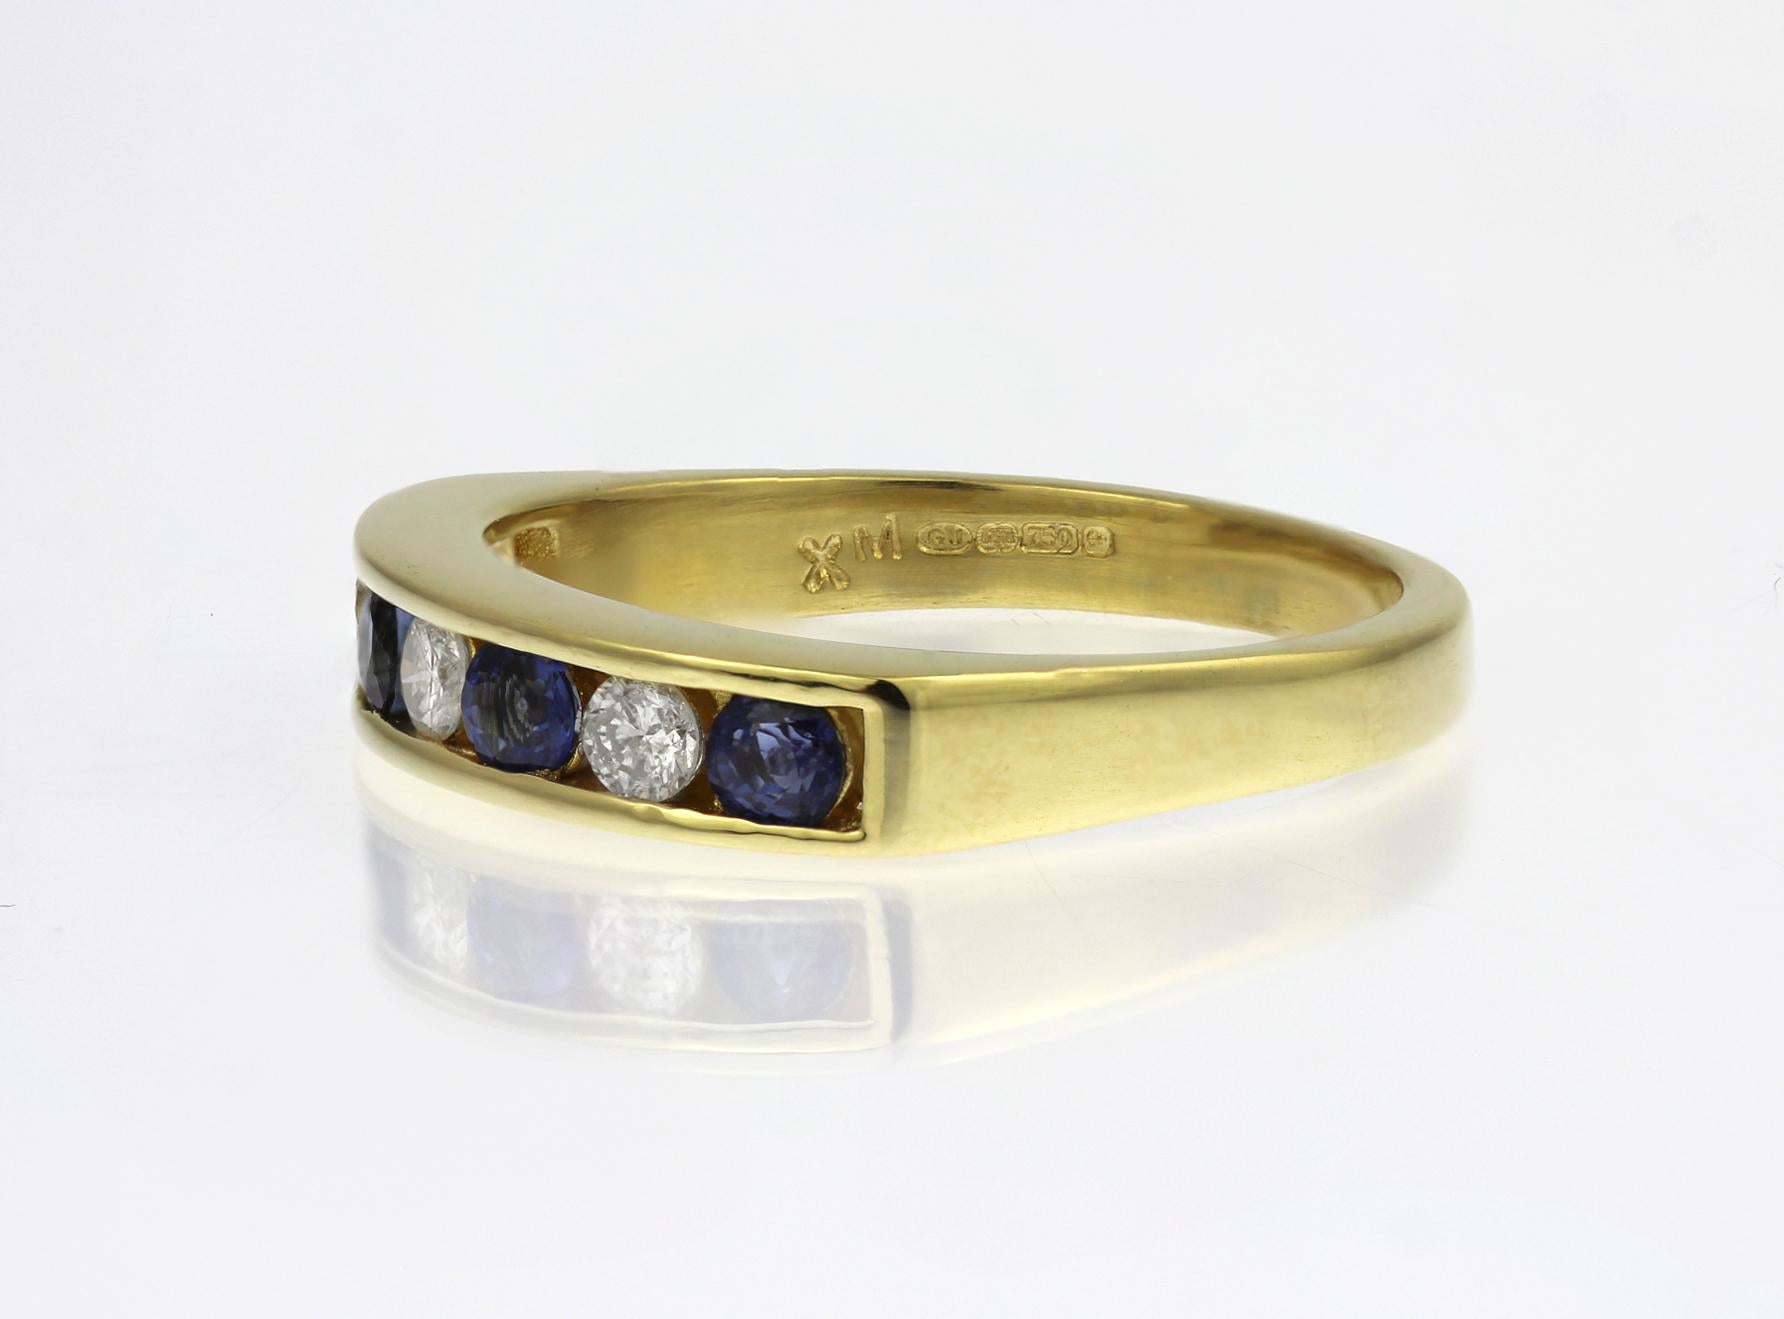 18ct yellow gold half eternity ring featuring four round cornflower blue sapphires alternated with 3 round brilliant cut diamonds weighing 0.20ct, colour I/J, clarity SI/I.  A classic, elegant style.

Channel setting:
3 x round diamonds, approximate